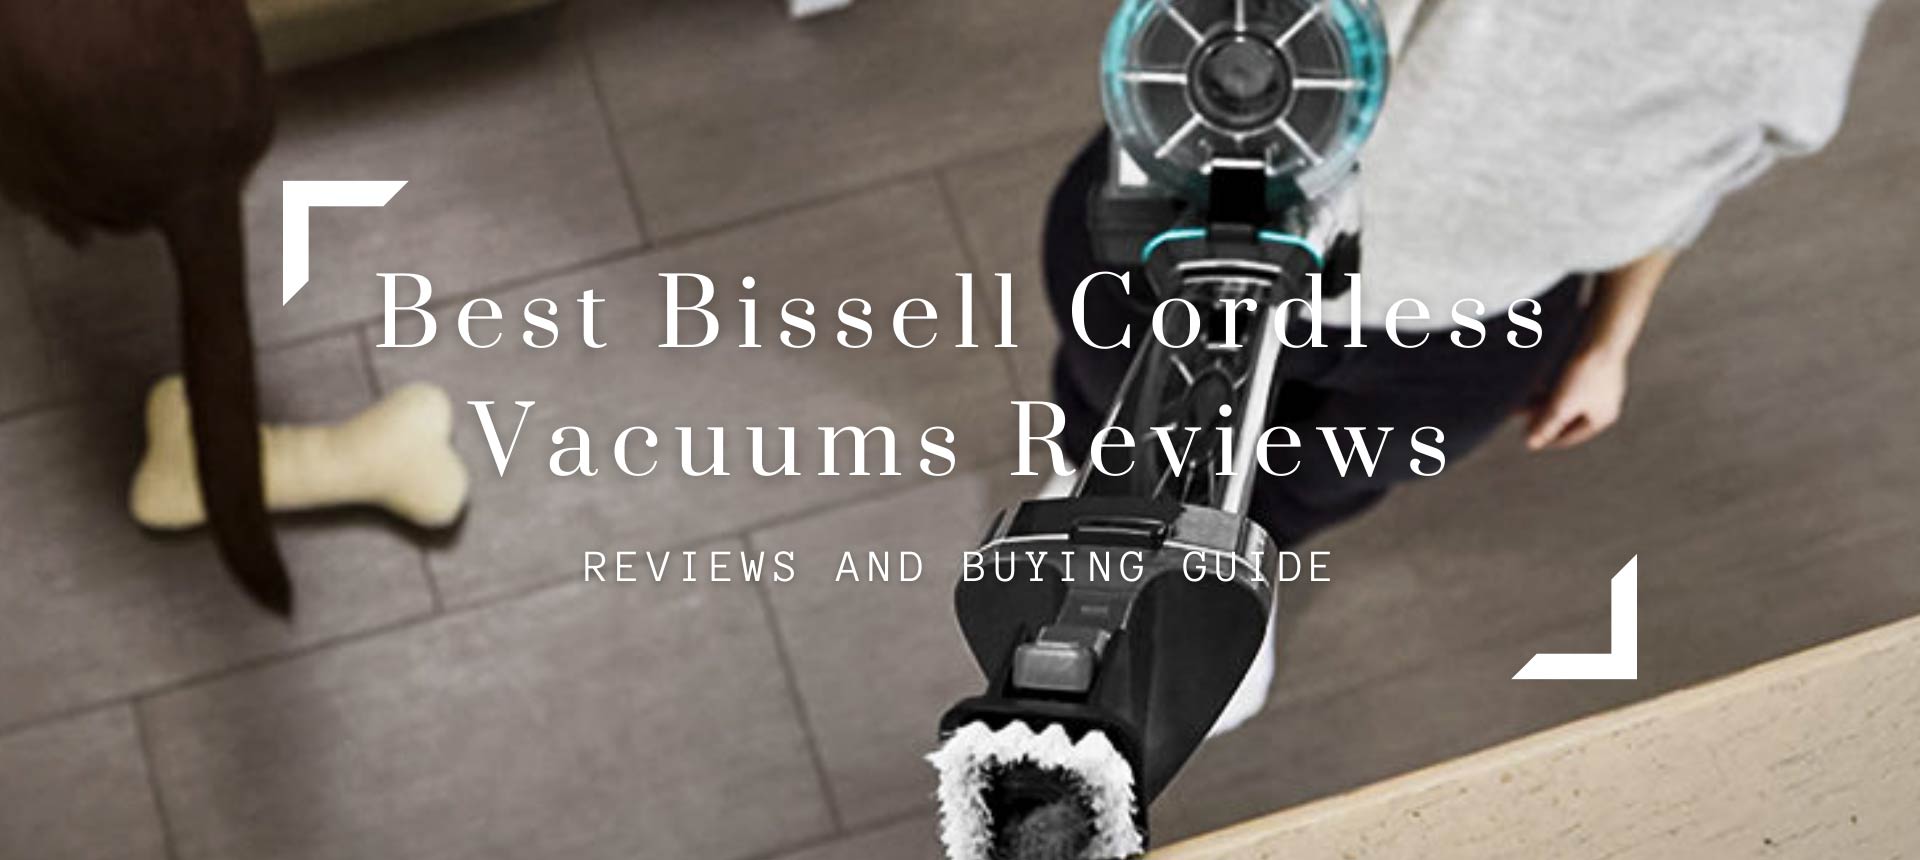 Best Bissell Cordless Vacuums Reviews of 2021